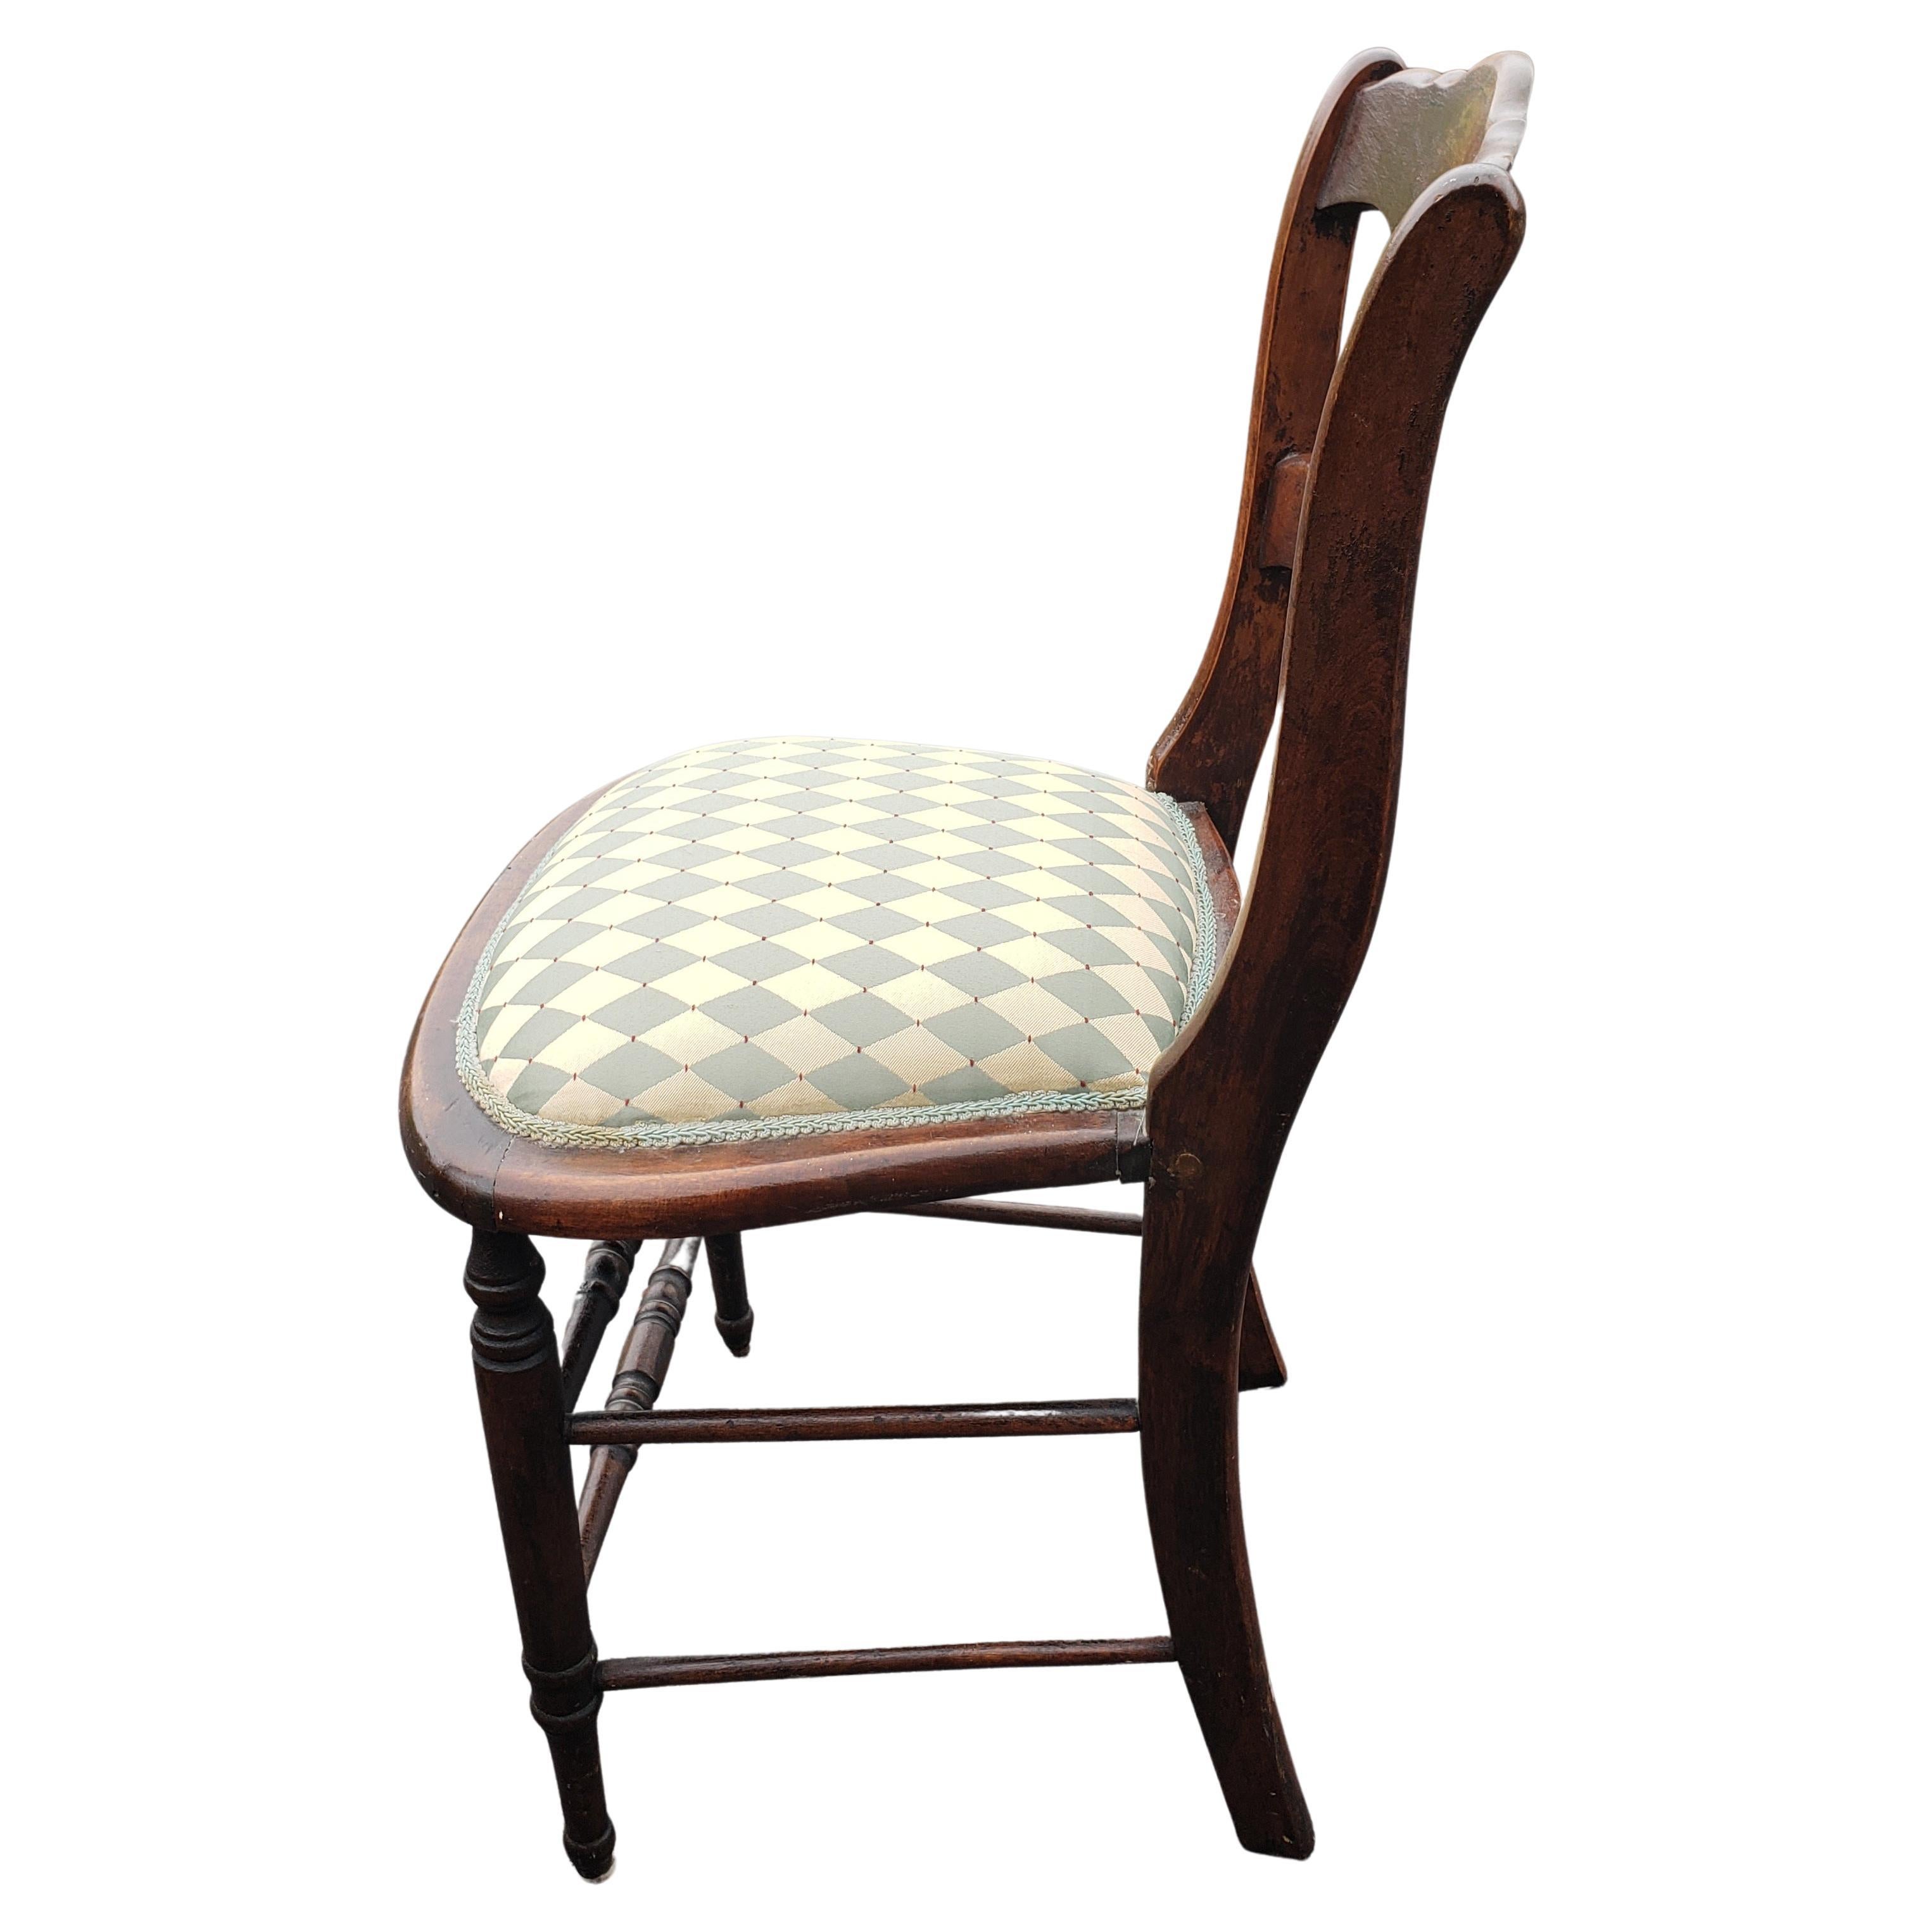 19th Century Ladder Back Victorian Reupholstered Mahogany Side Chair, Circa 1860s For Sale